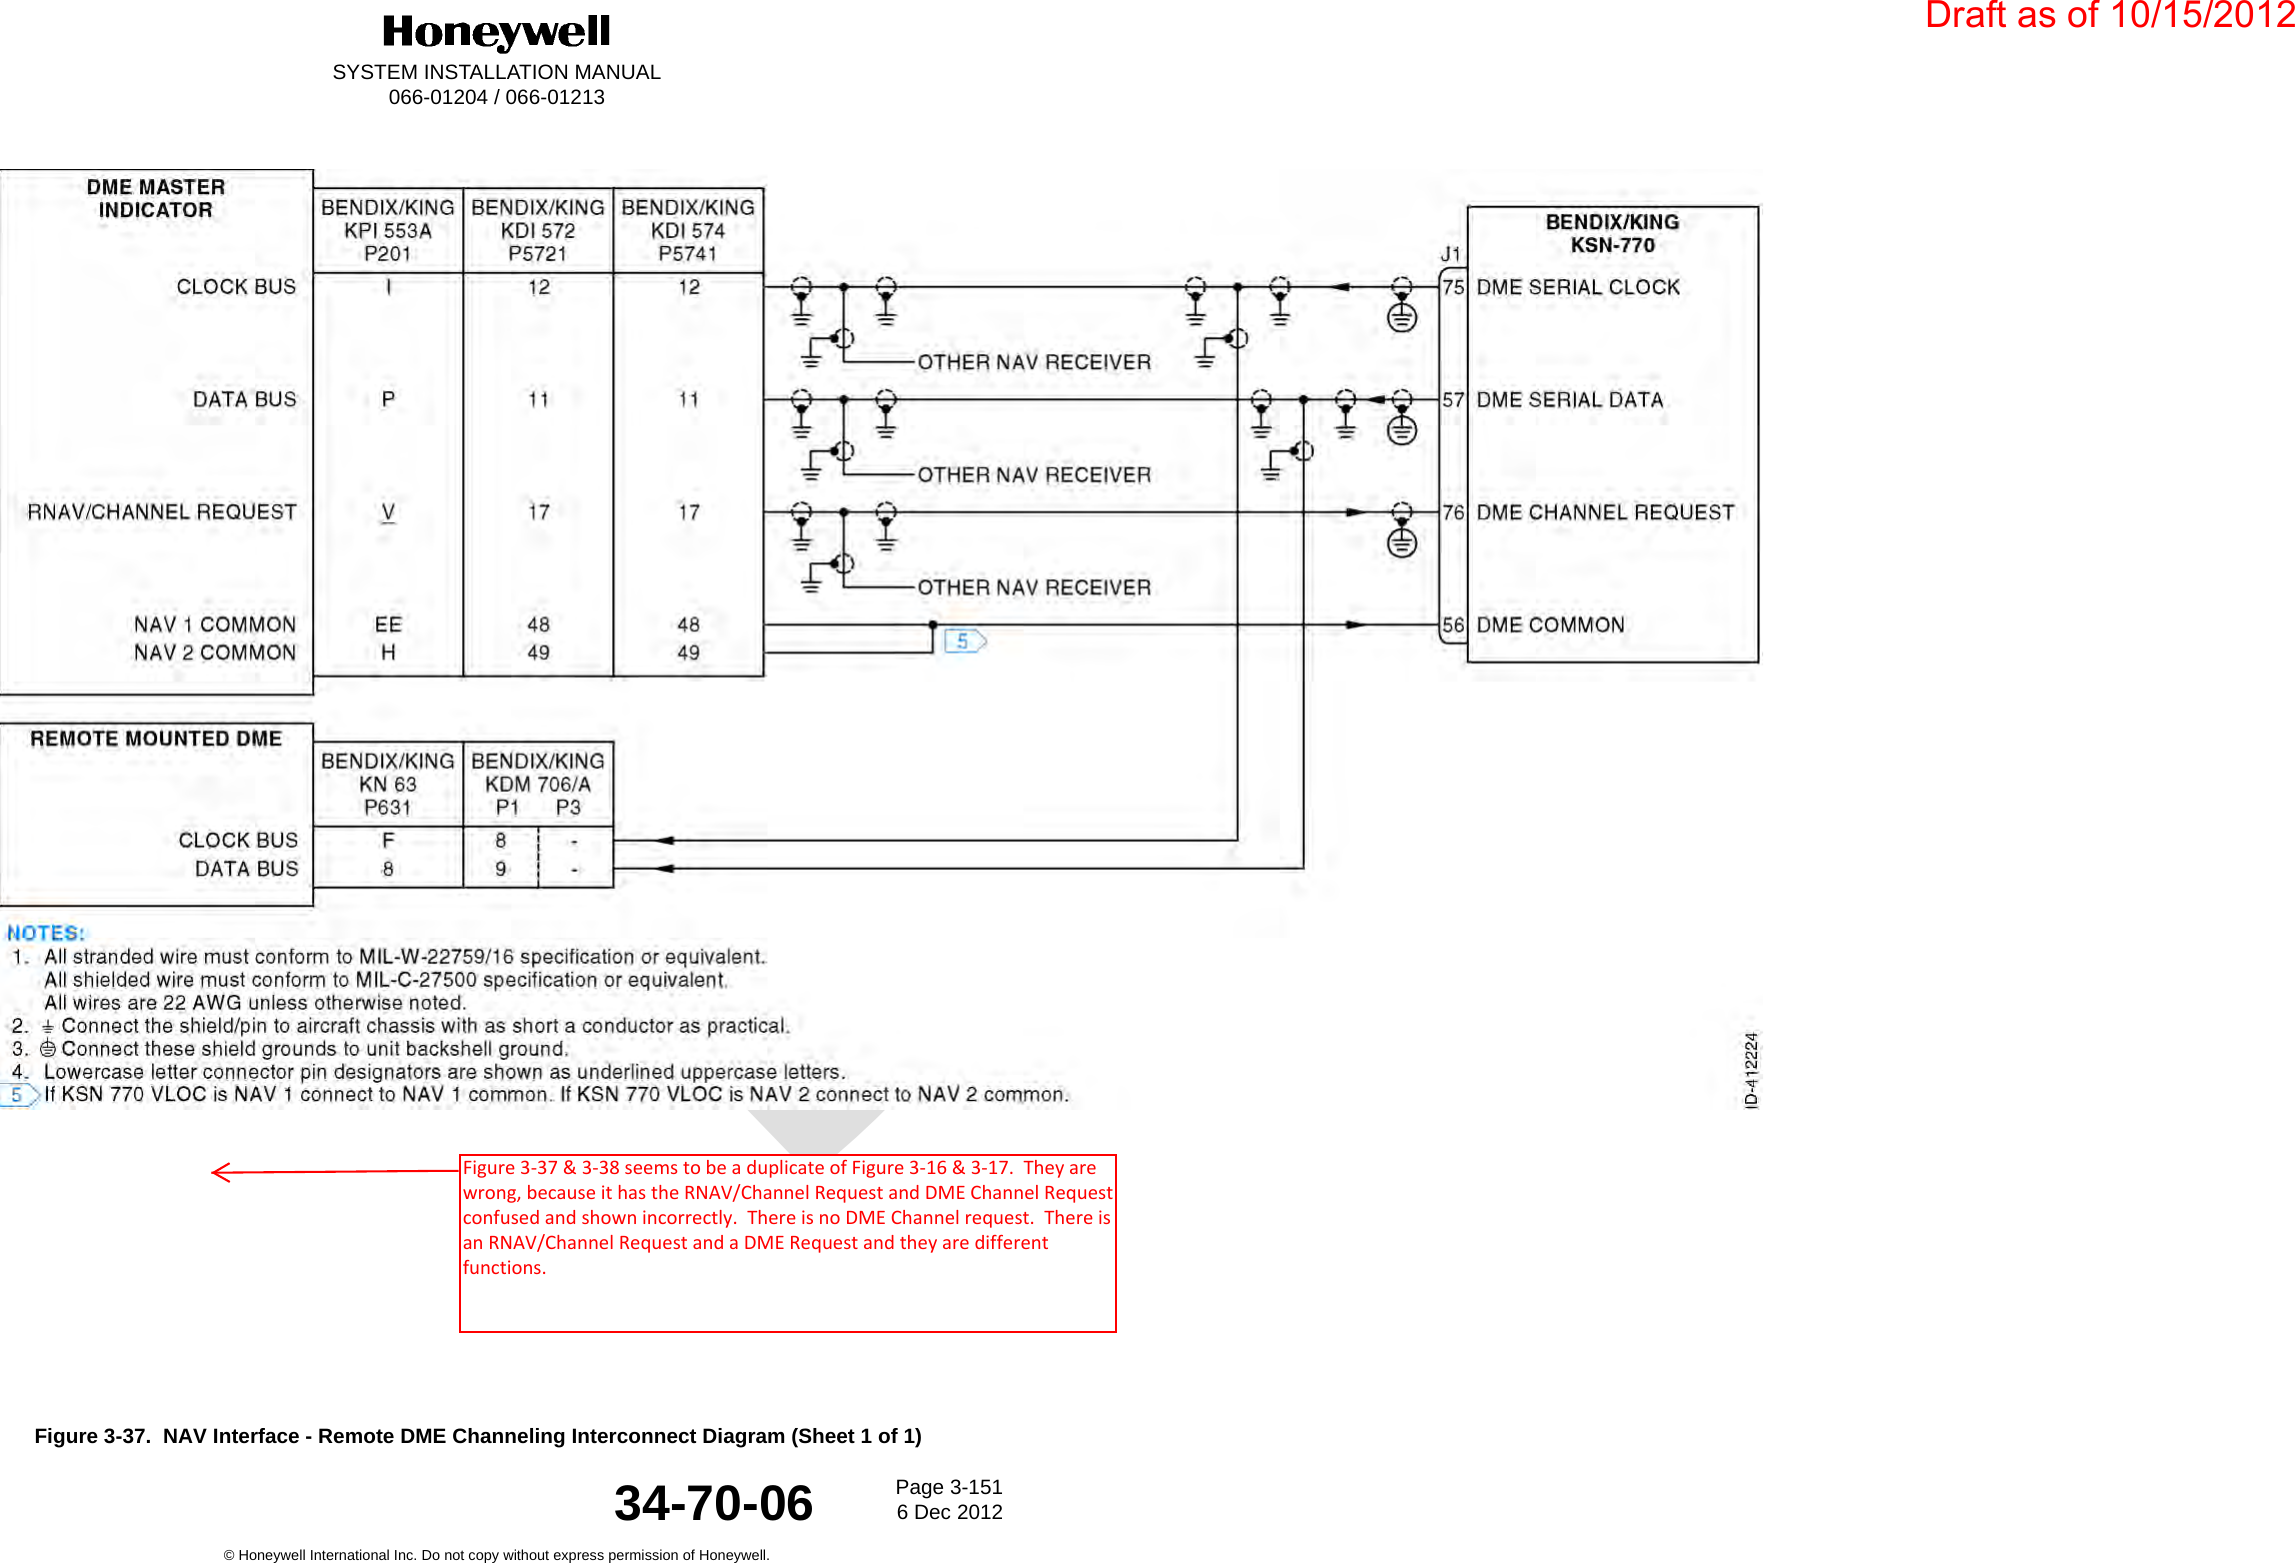 DraftSYSTEM INSTALLATION MANUAL066-01204 / 066-01213Page 3-1516 Dec 2012© Honeywell International Inc. Do not copy without express permission of Honeywell.34-70-06Figure 3-37.  NAV Interface - Remote DME Channeling Interconnect Diagram (Sheet 1 of 1)Draft as of 10/15/2012Figure 3-37 &amp; 3-38 seems to be a duplicate of Figure 3-16 &amp; 3-17.  They are wrong, because it has the RNAV/Channel Request and DME Channel Request confused and shown incorrectly.  There is no DME Channel request.  There is an RNAV/Channel Request and a DME Request and they are different functions. 